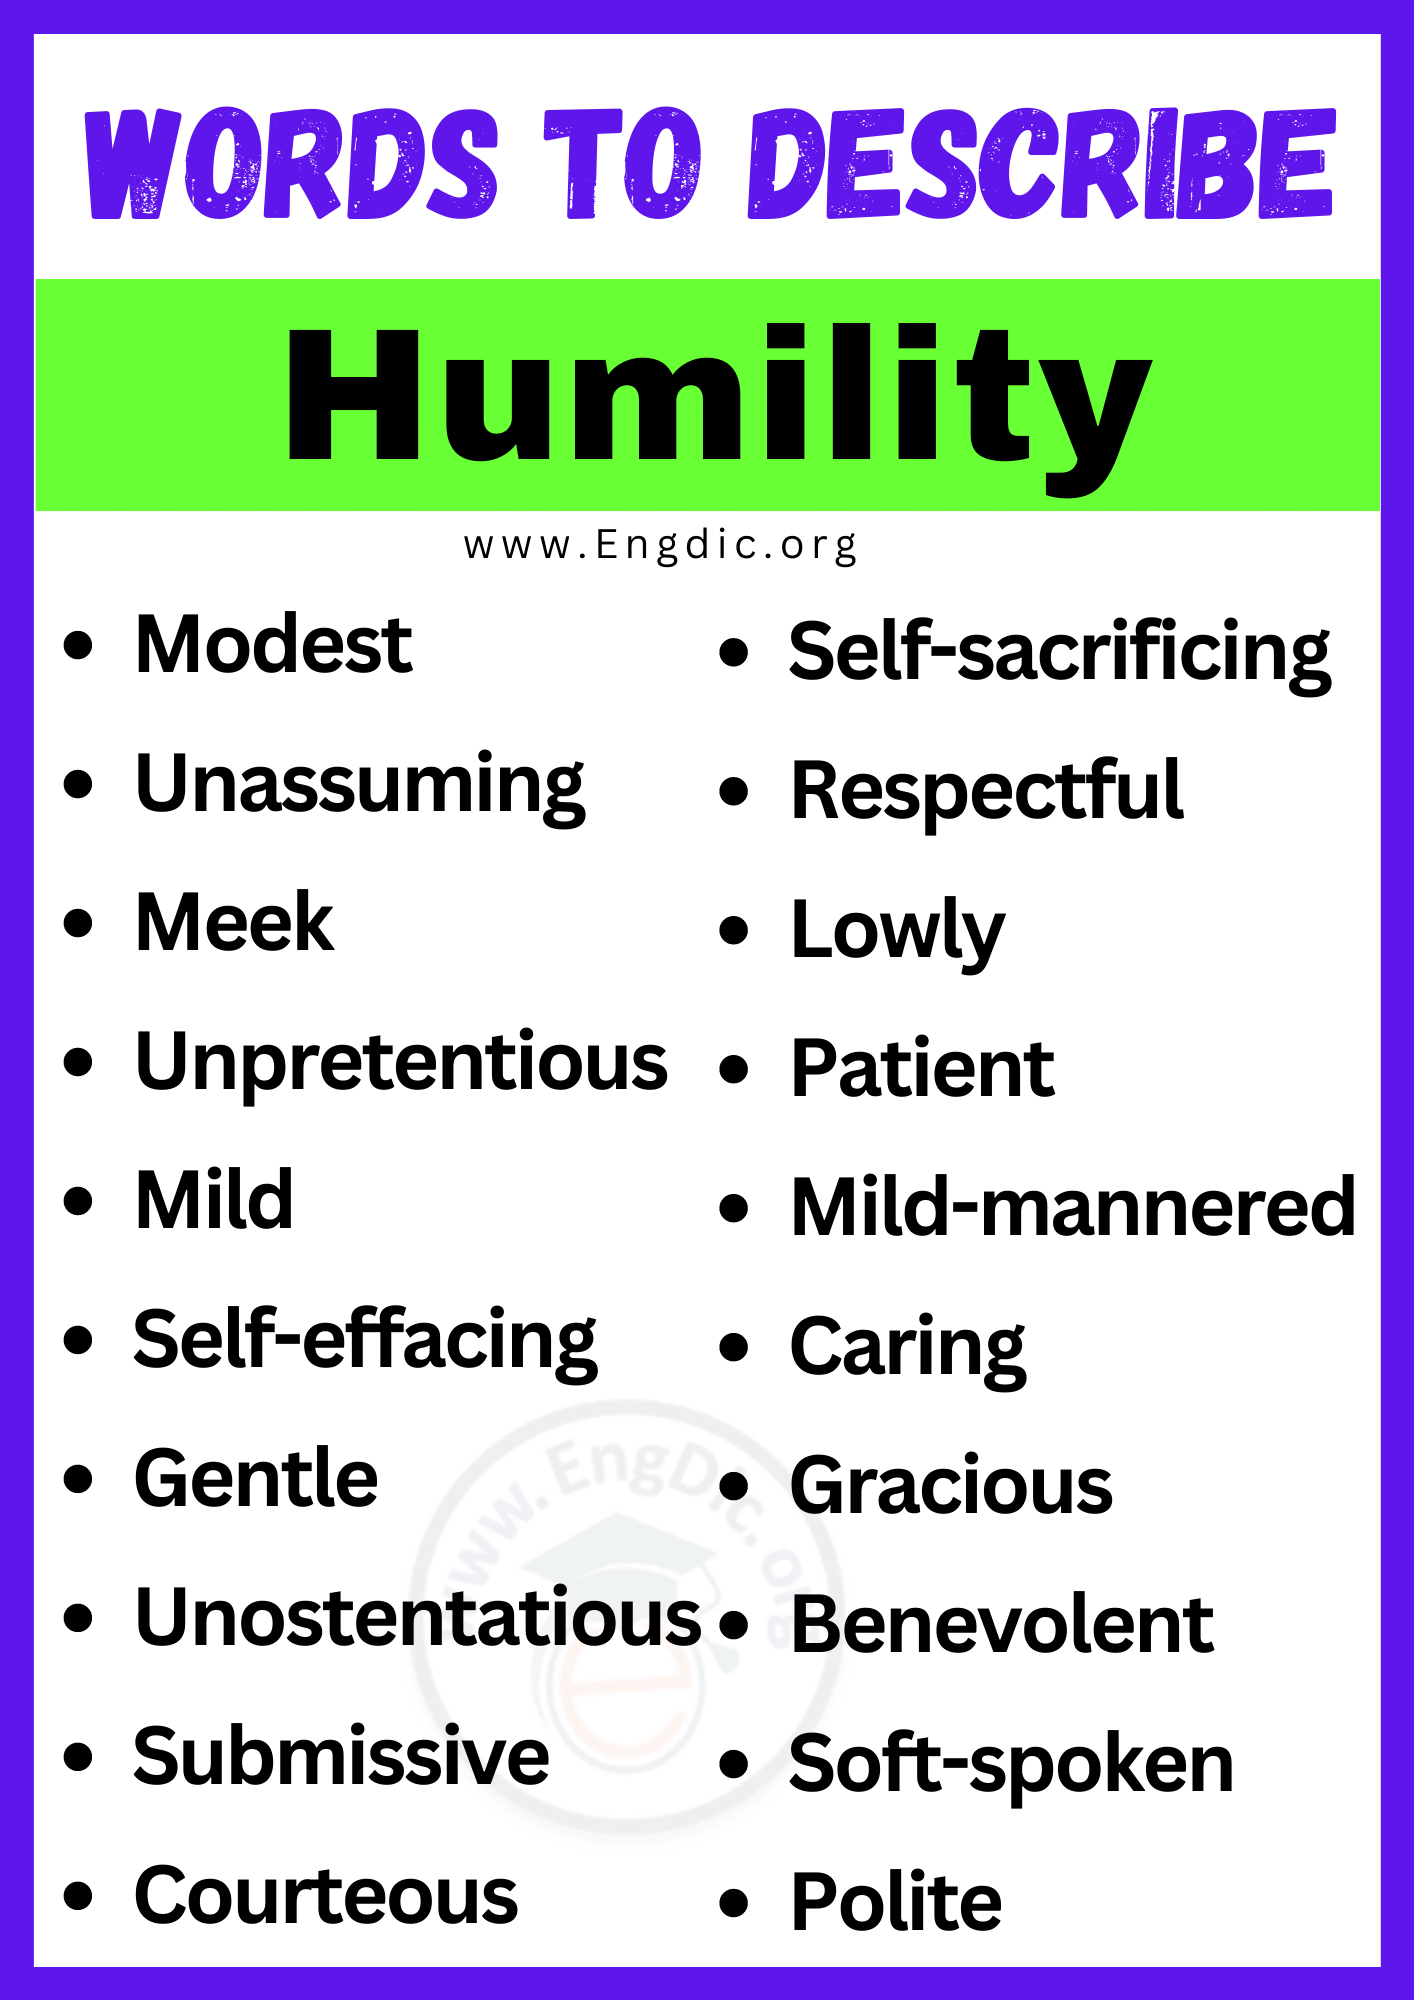 Words to Describe Humility